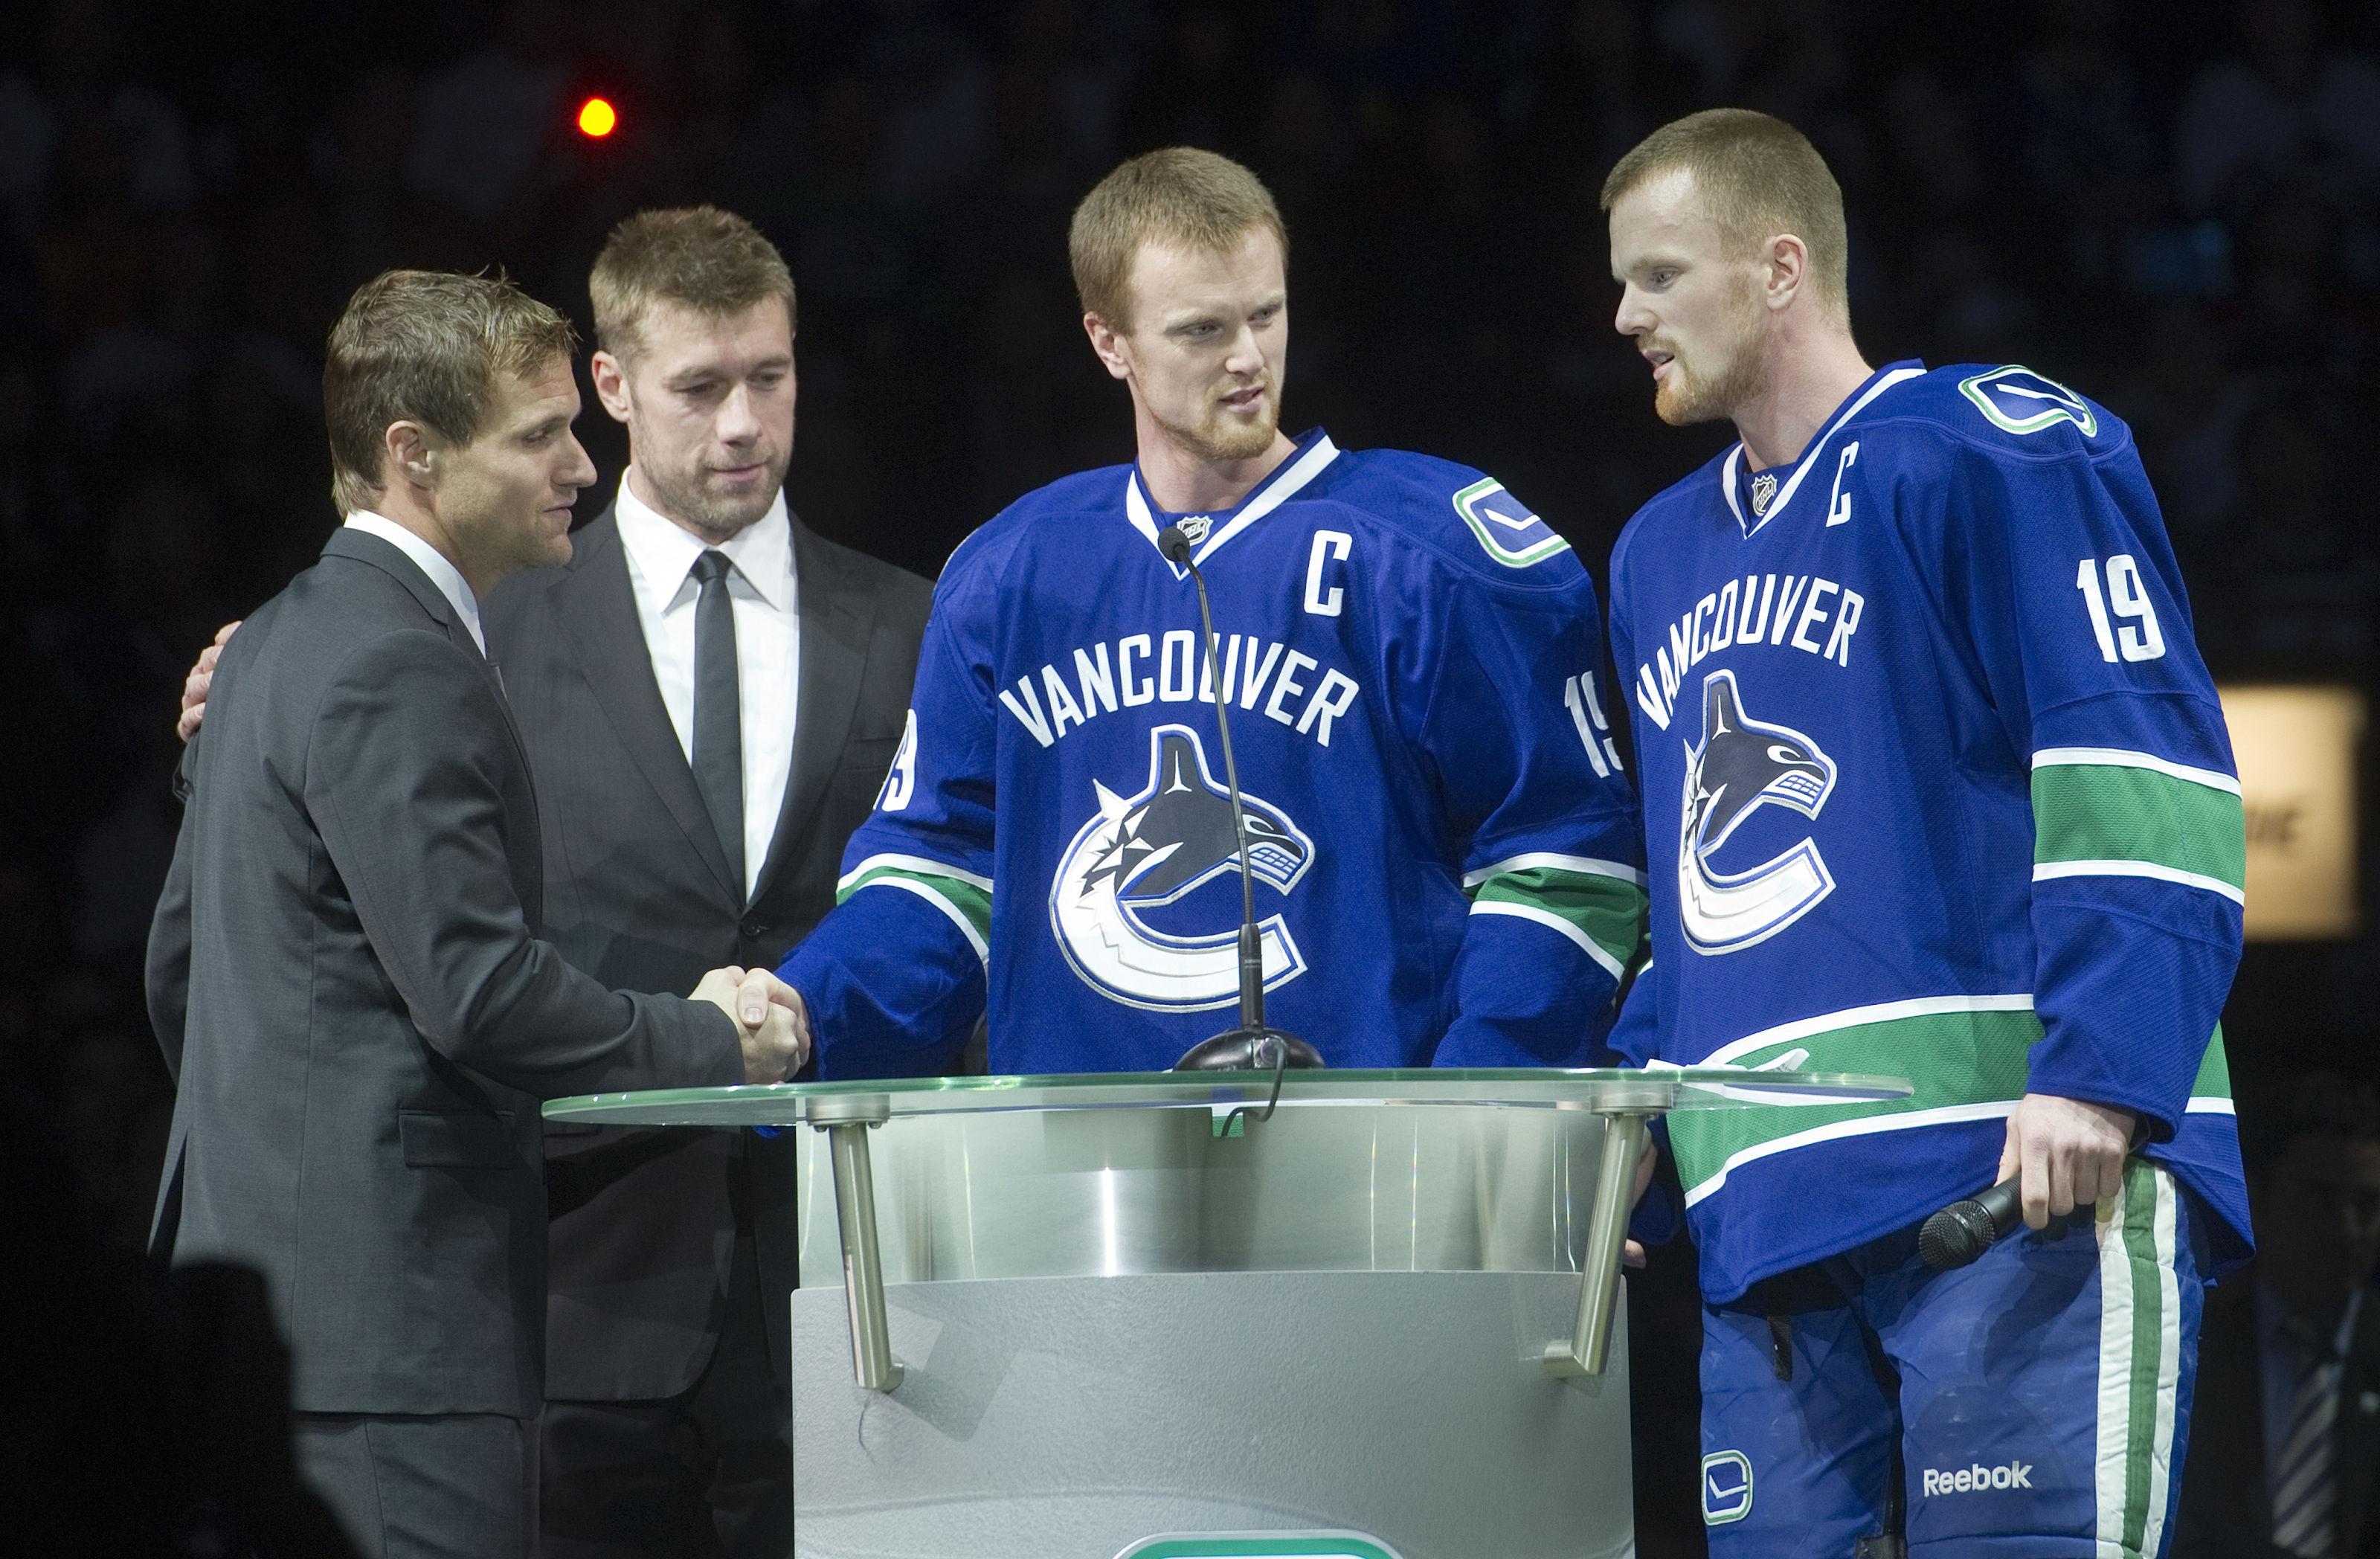 Canucks fans love the Flying Skate jersey, so why don't we see it